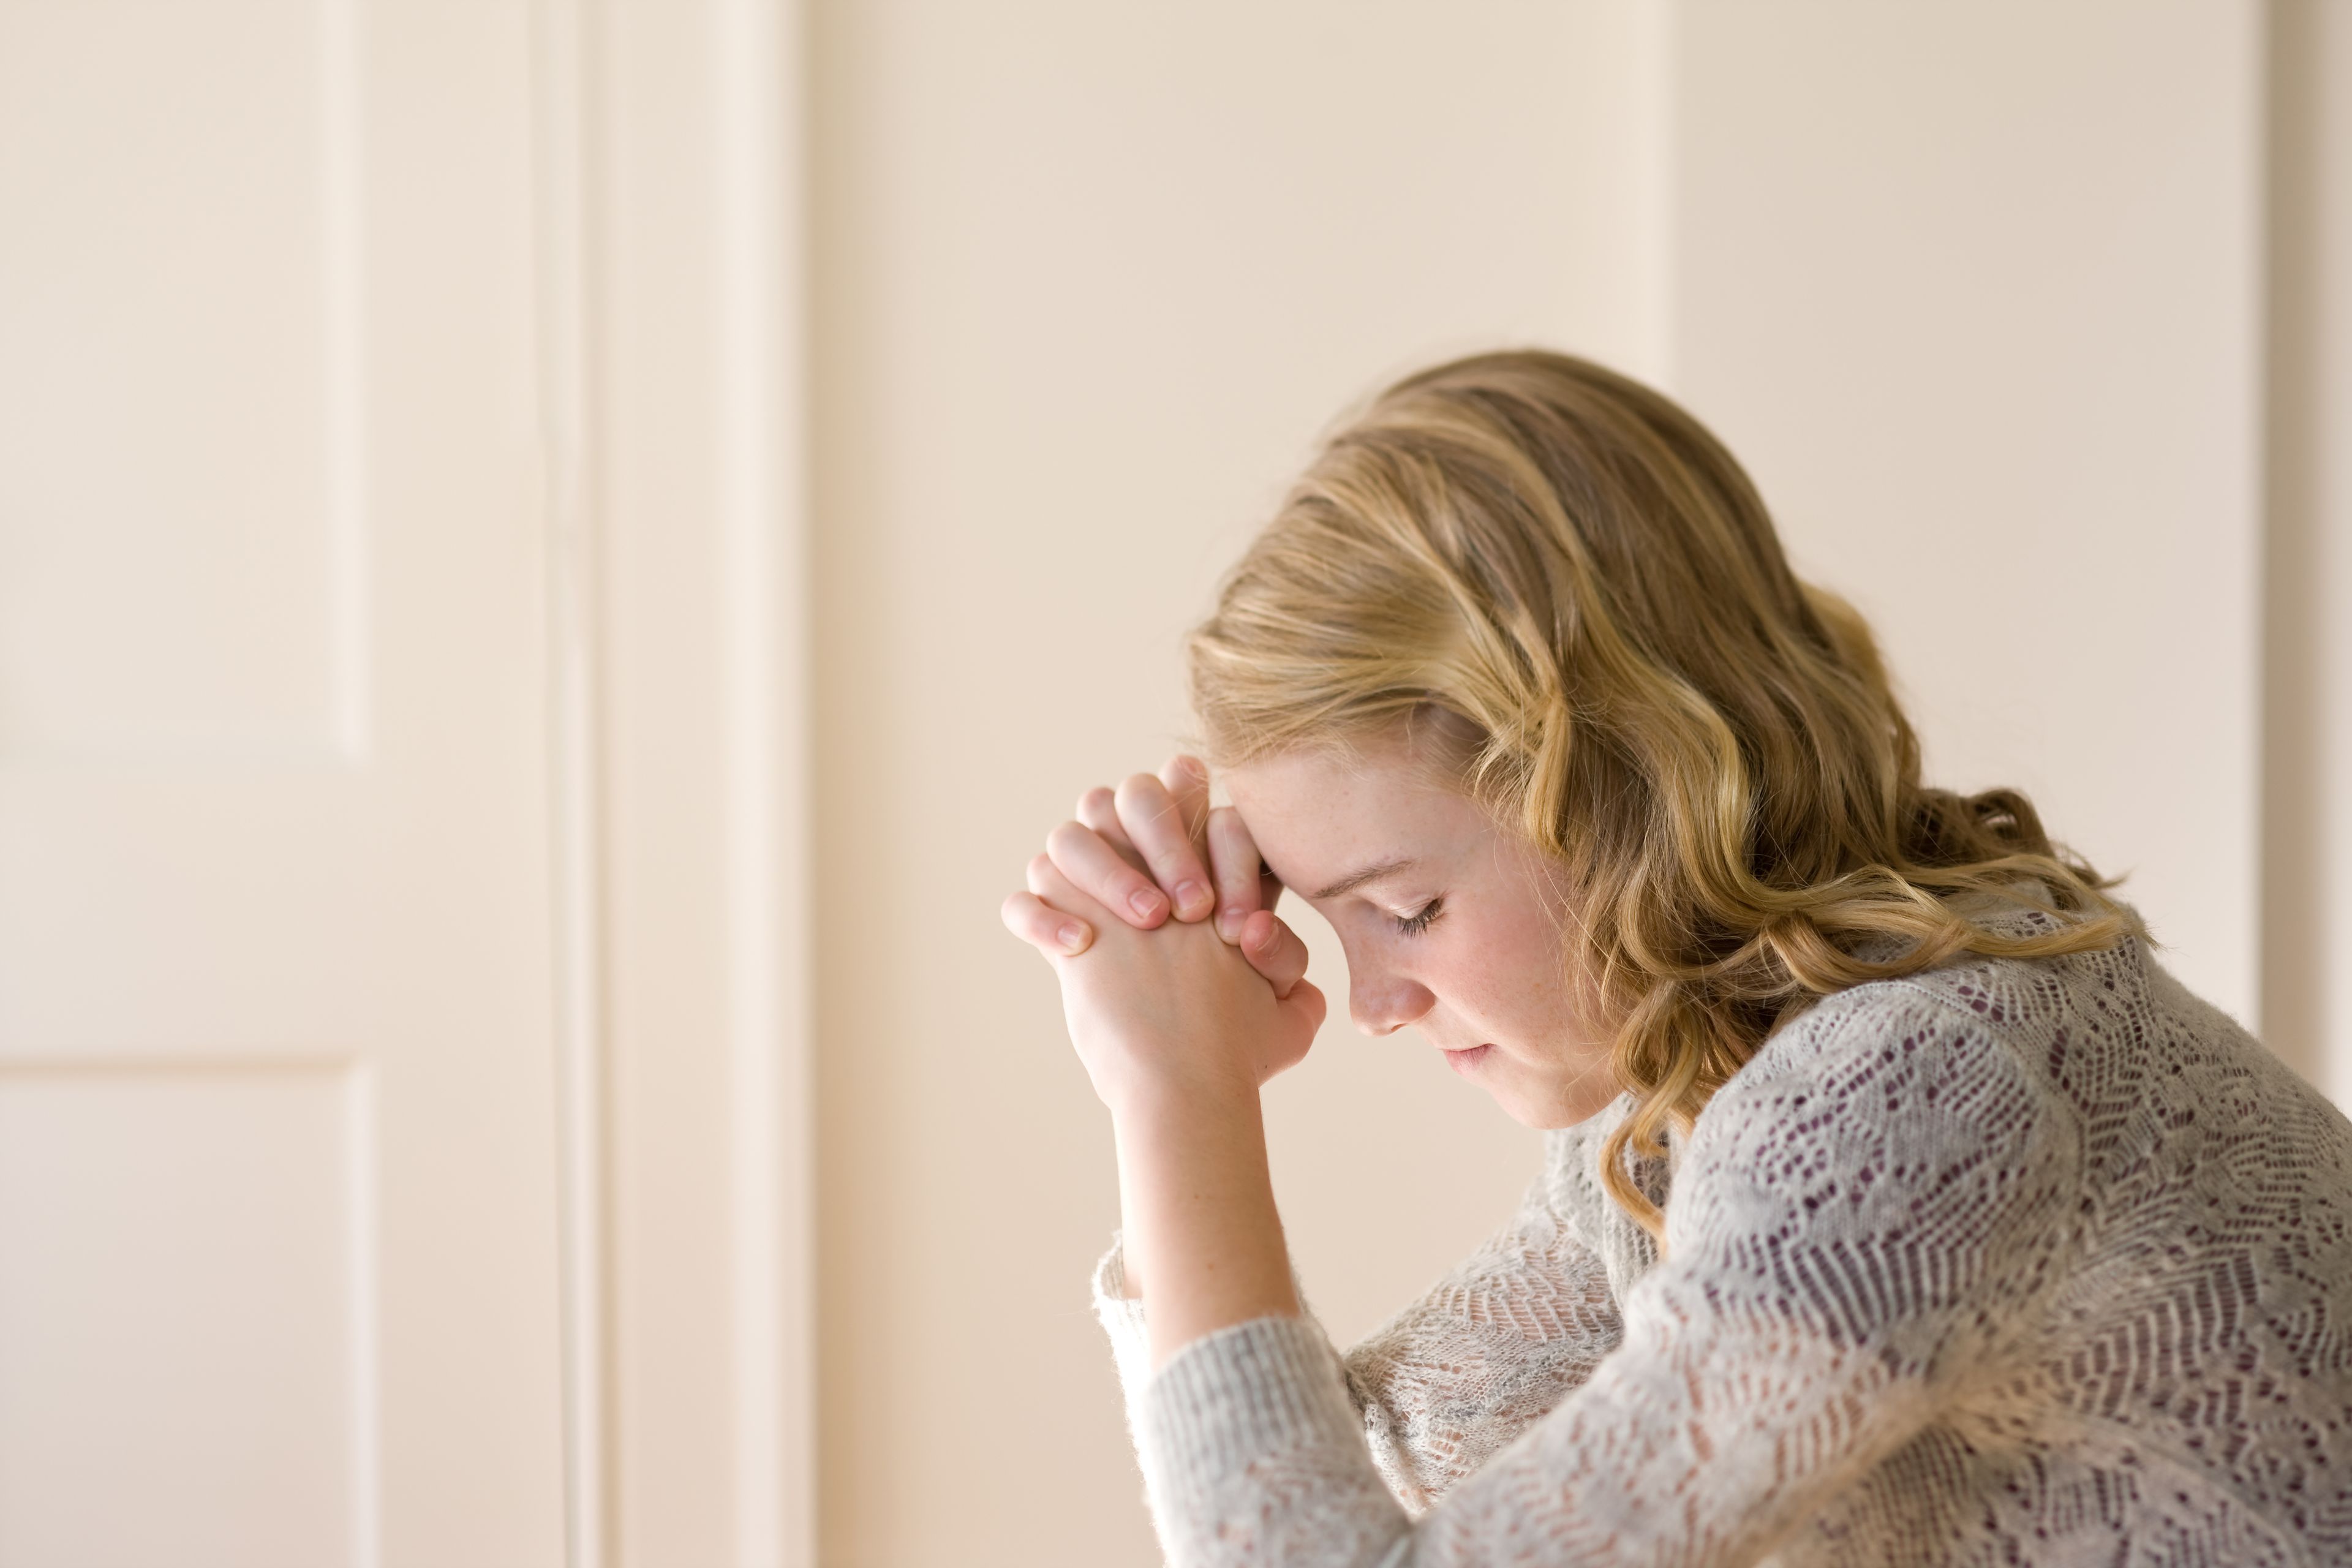 A young woman kneels in prayer.